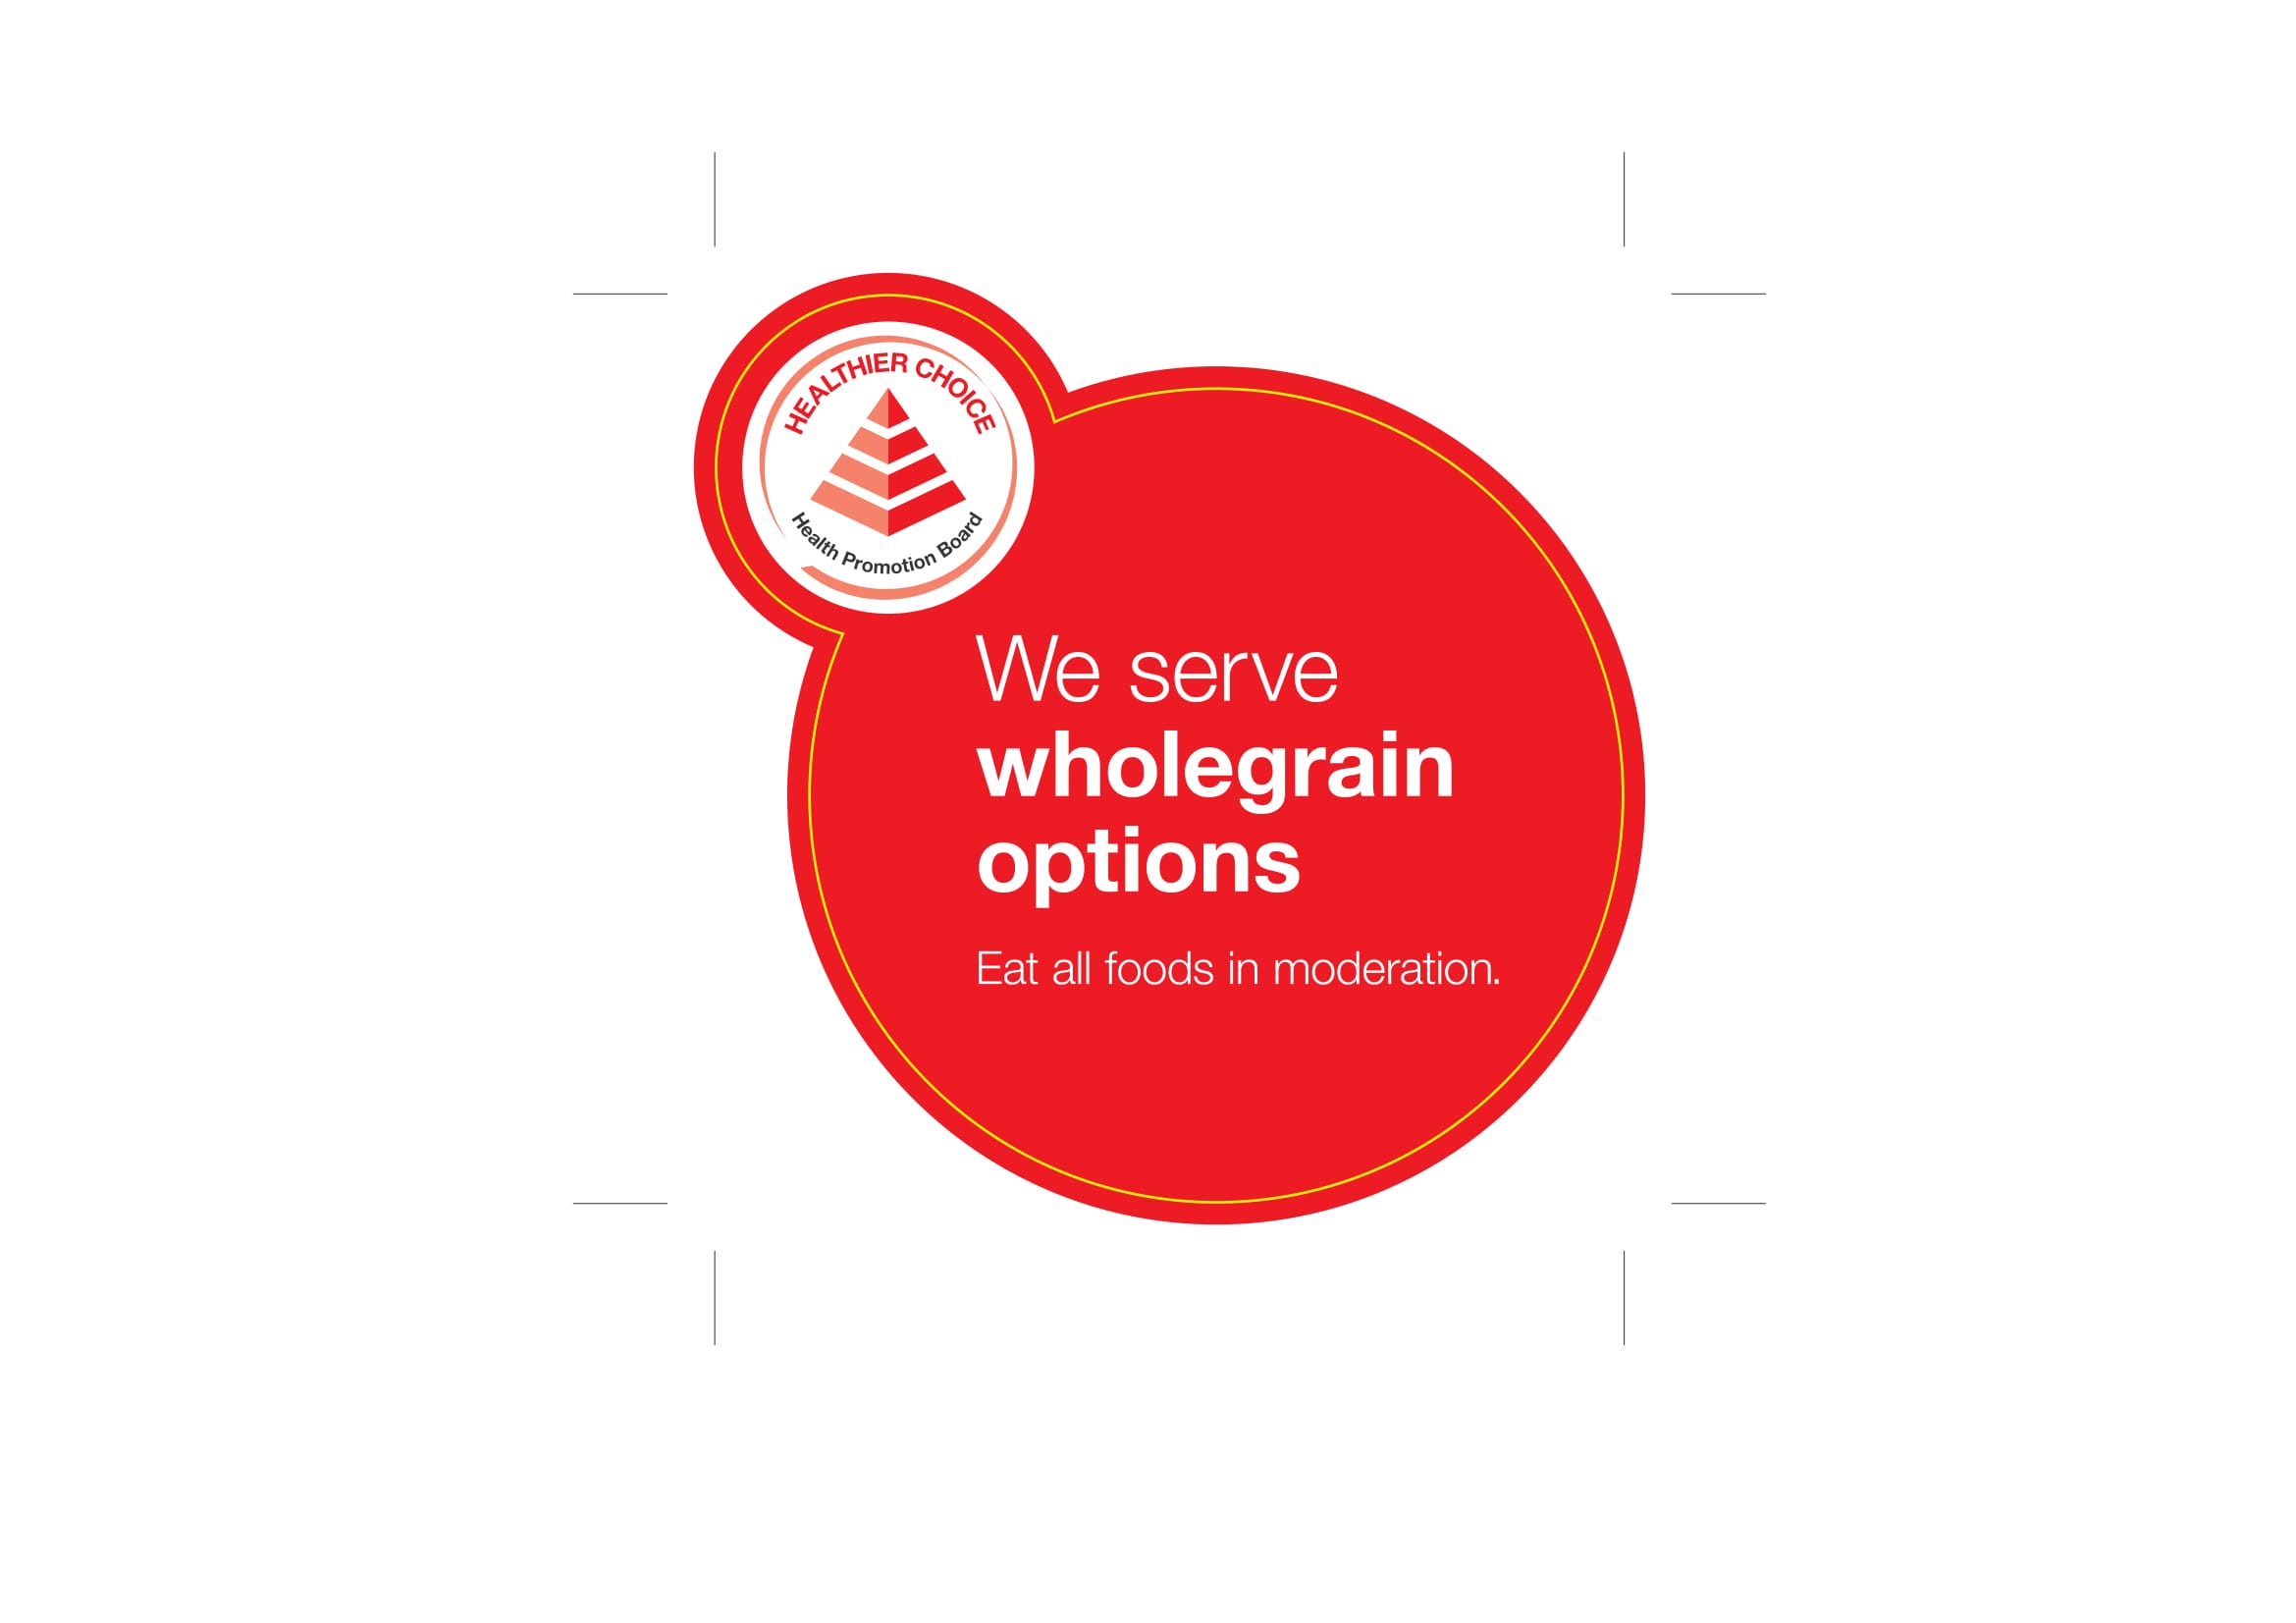 Look out for food products that are wholegrains friendly.